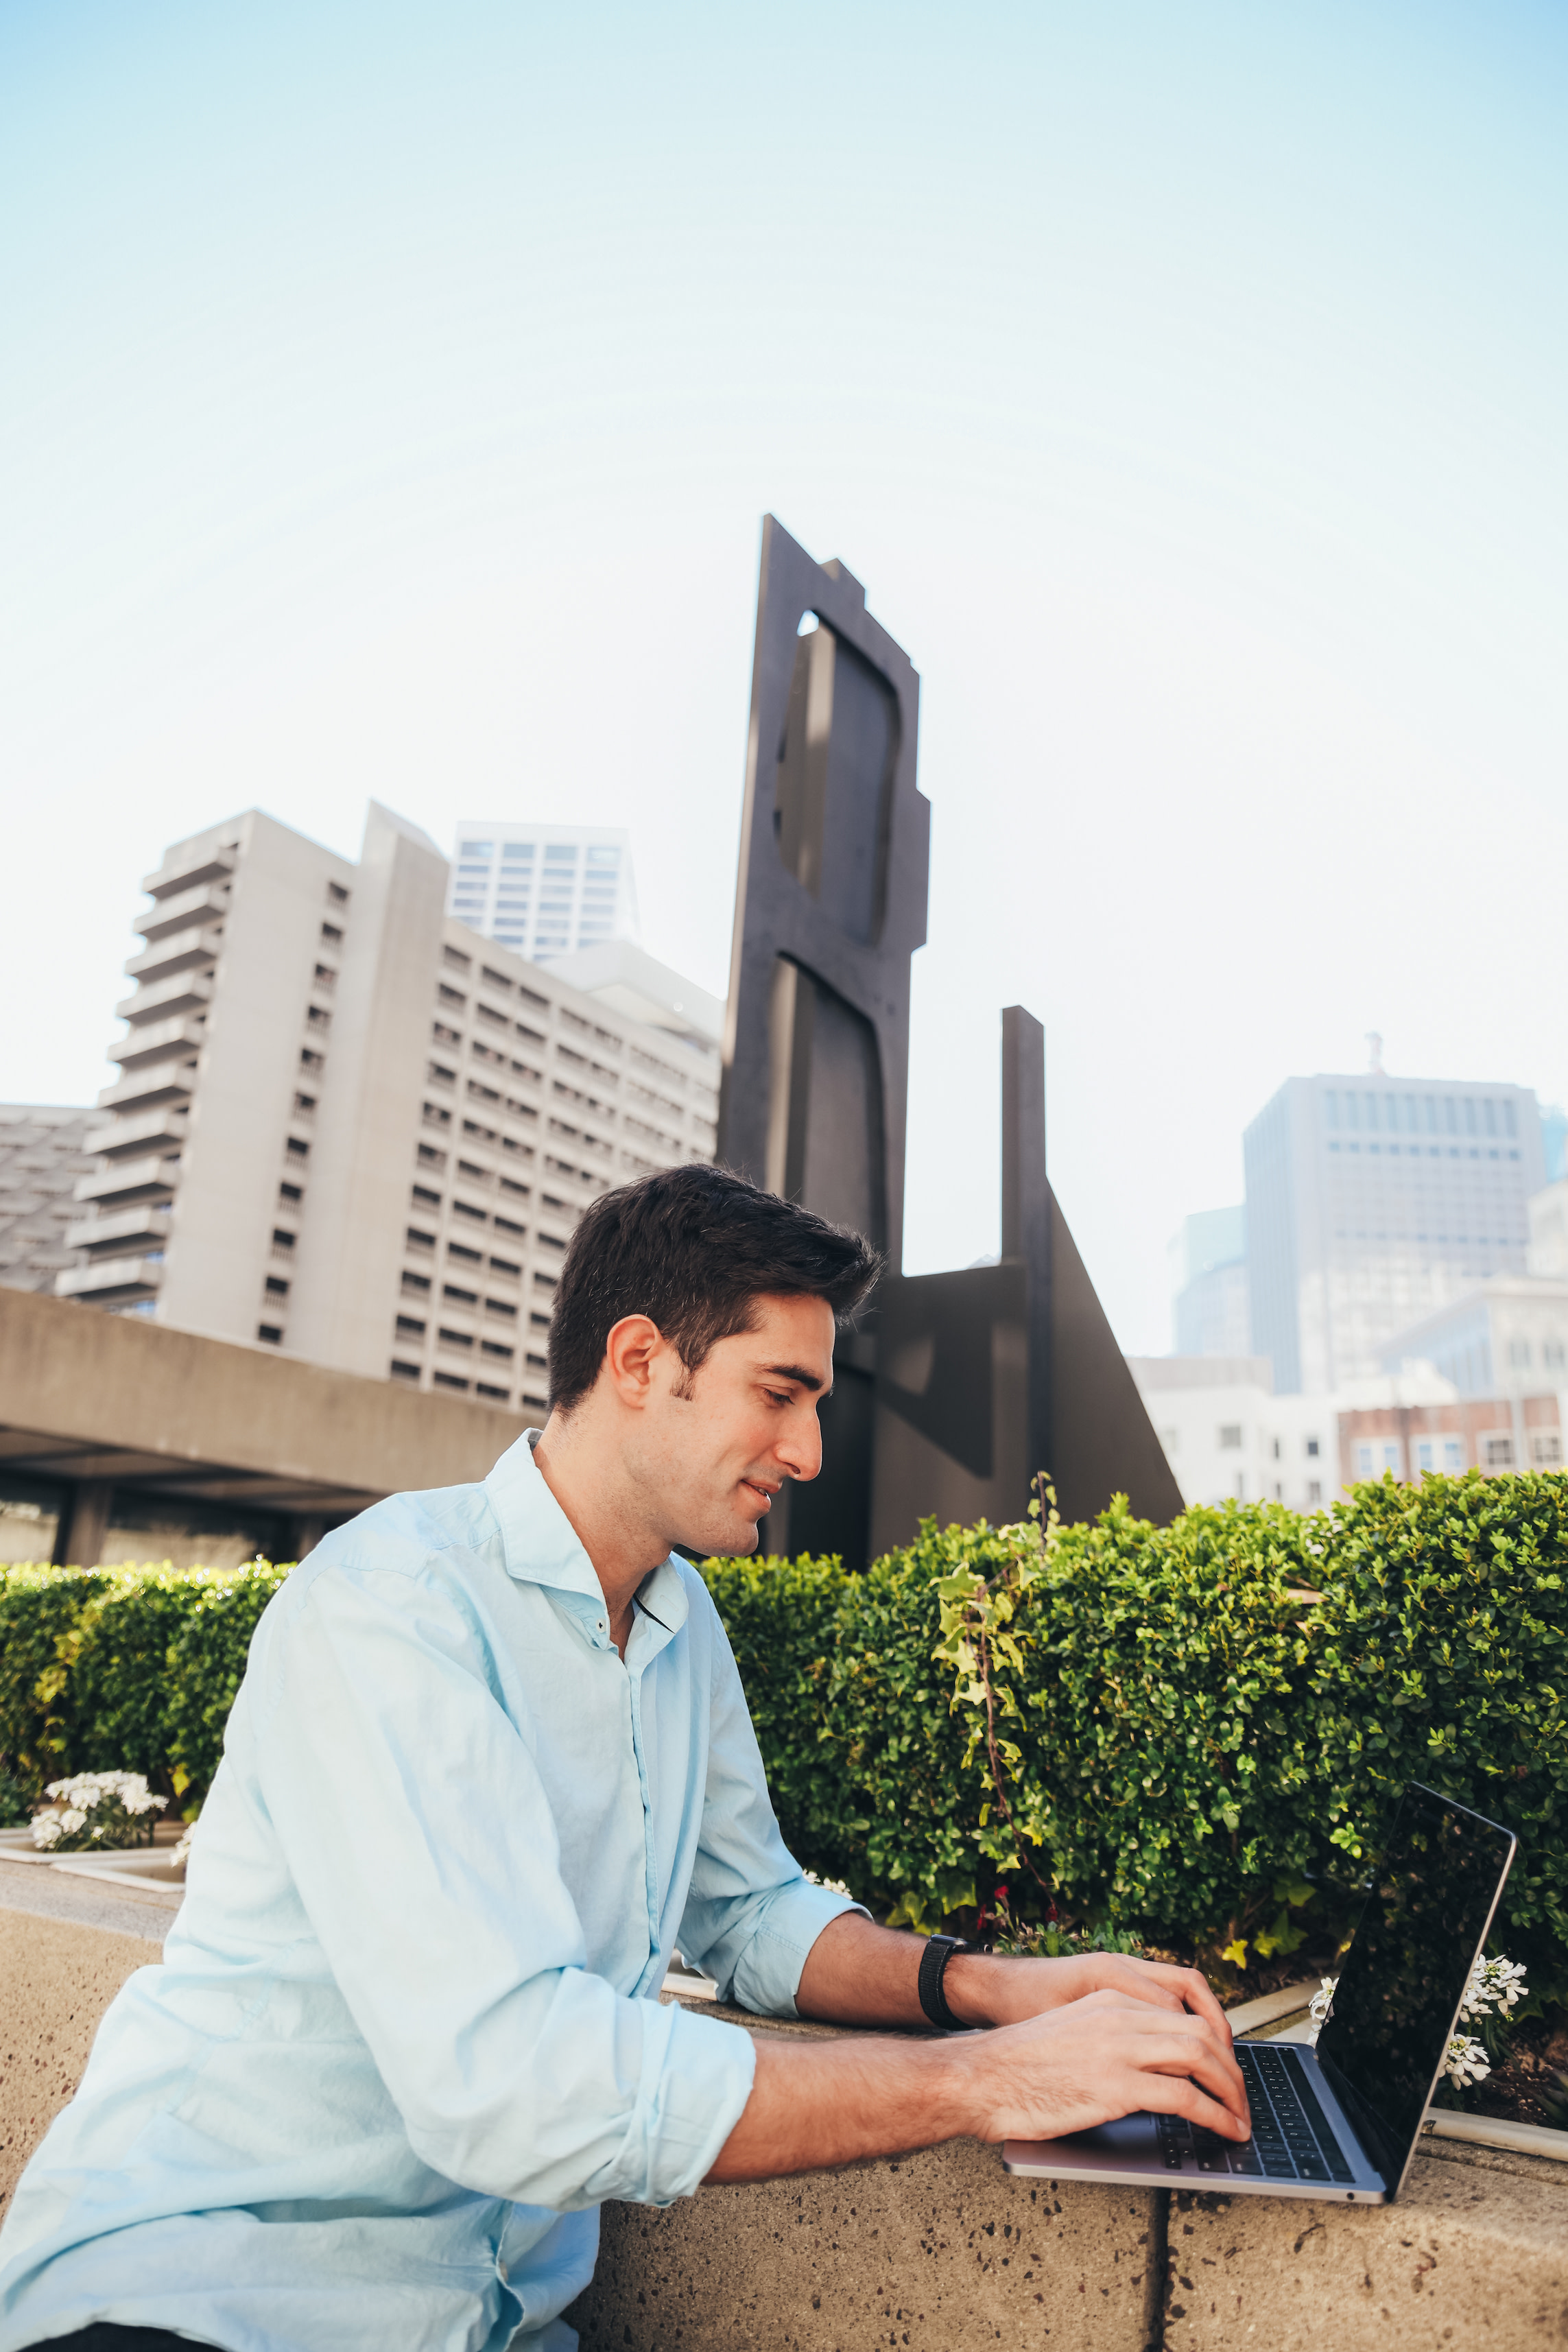 Author Feross working on his laptop outside in an urban landscape